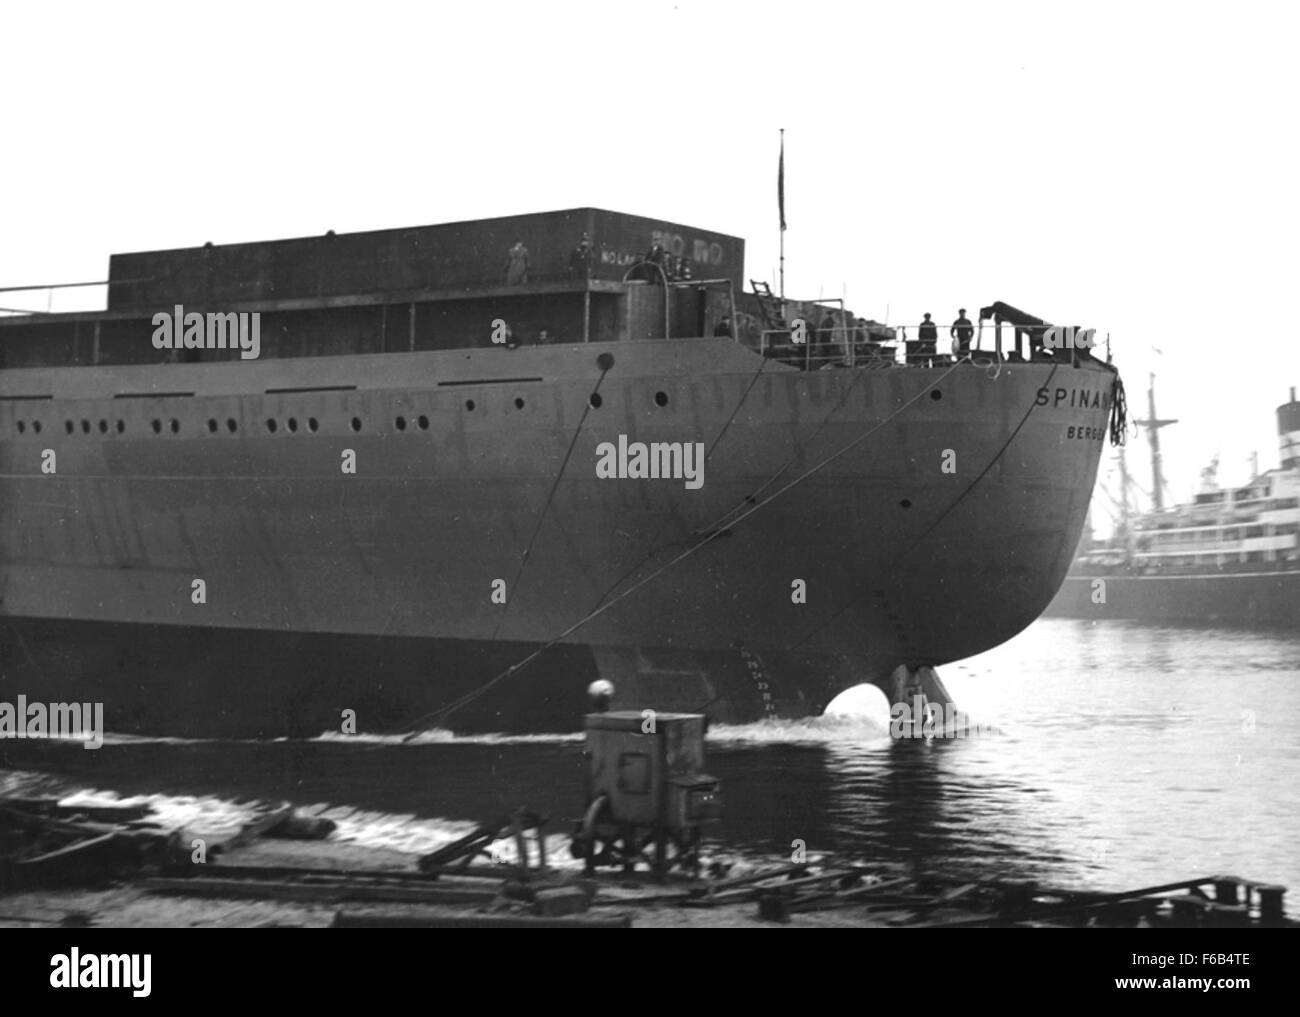 Vintage tanker ship Black and White Stock Photos & Images - Alamy